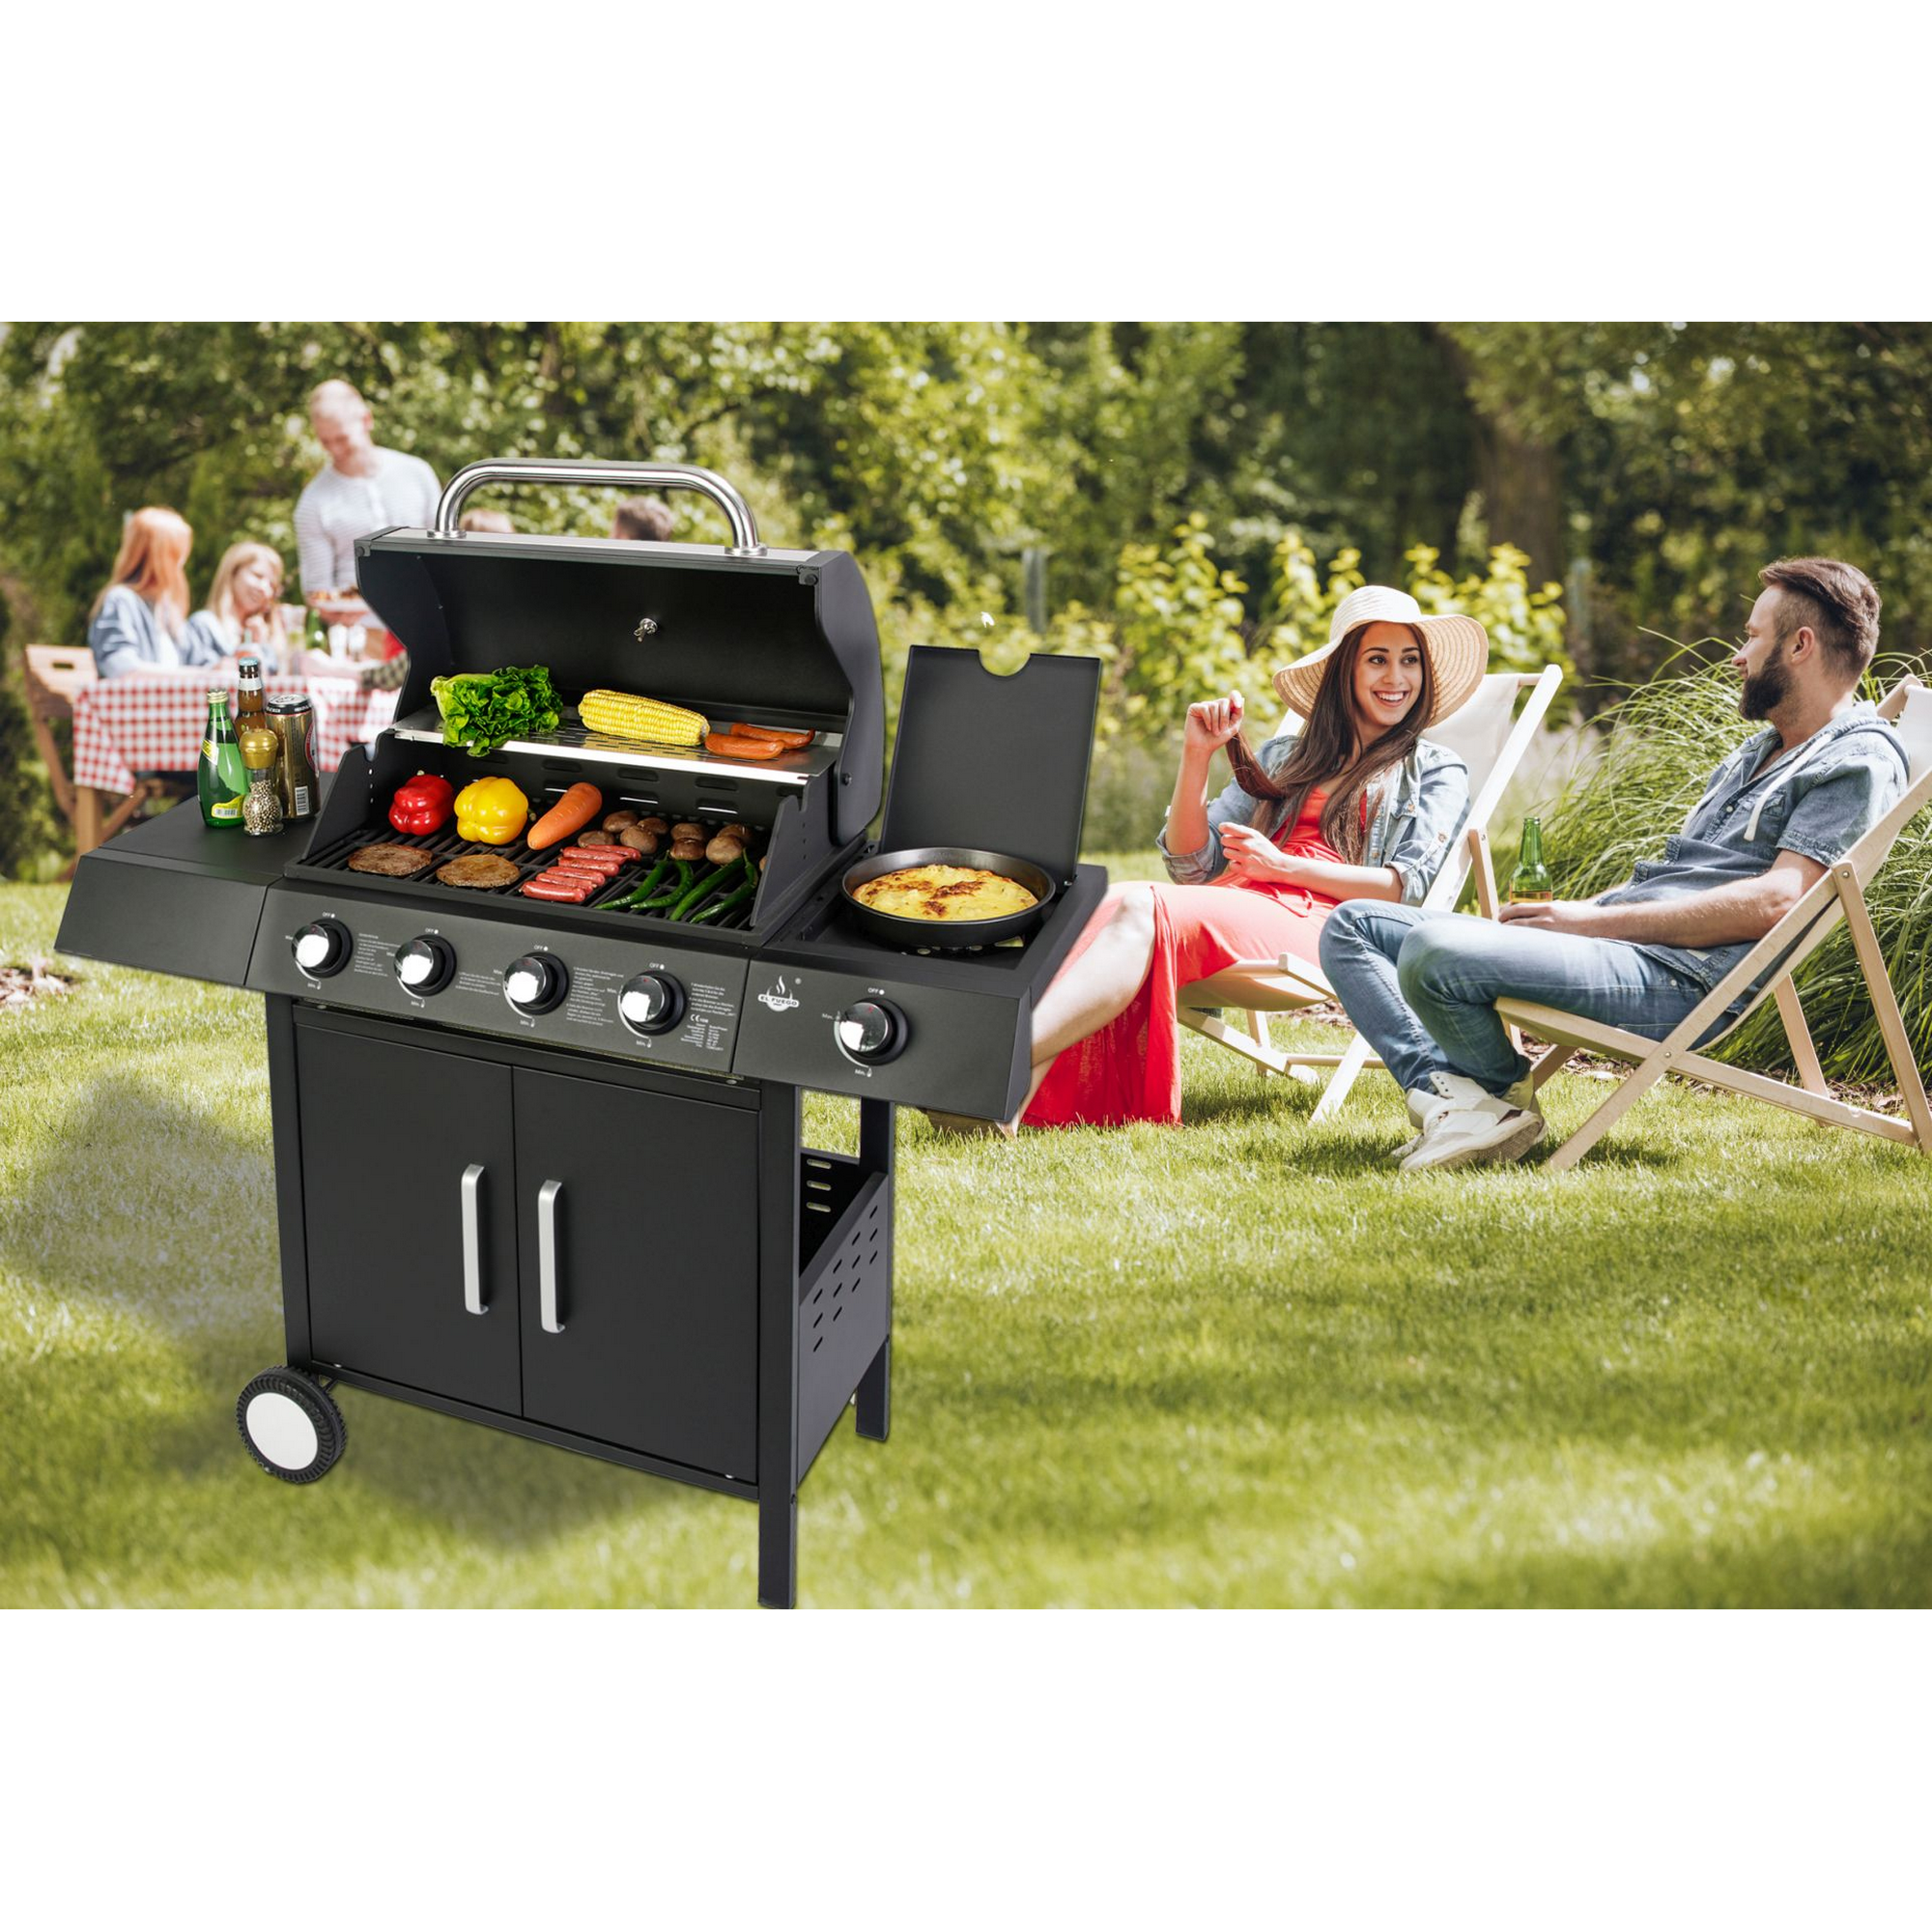 Gasgrill 'San Angelo' schwarz 110 x 120 x 48 cm + product picture